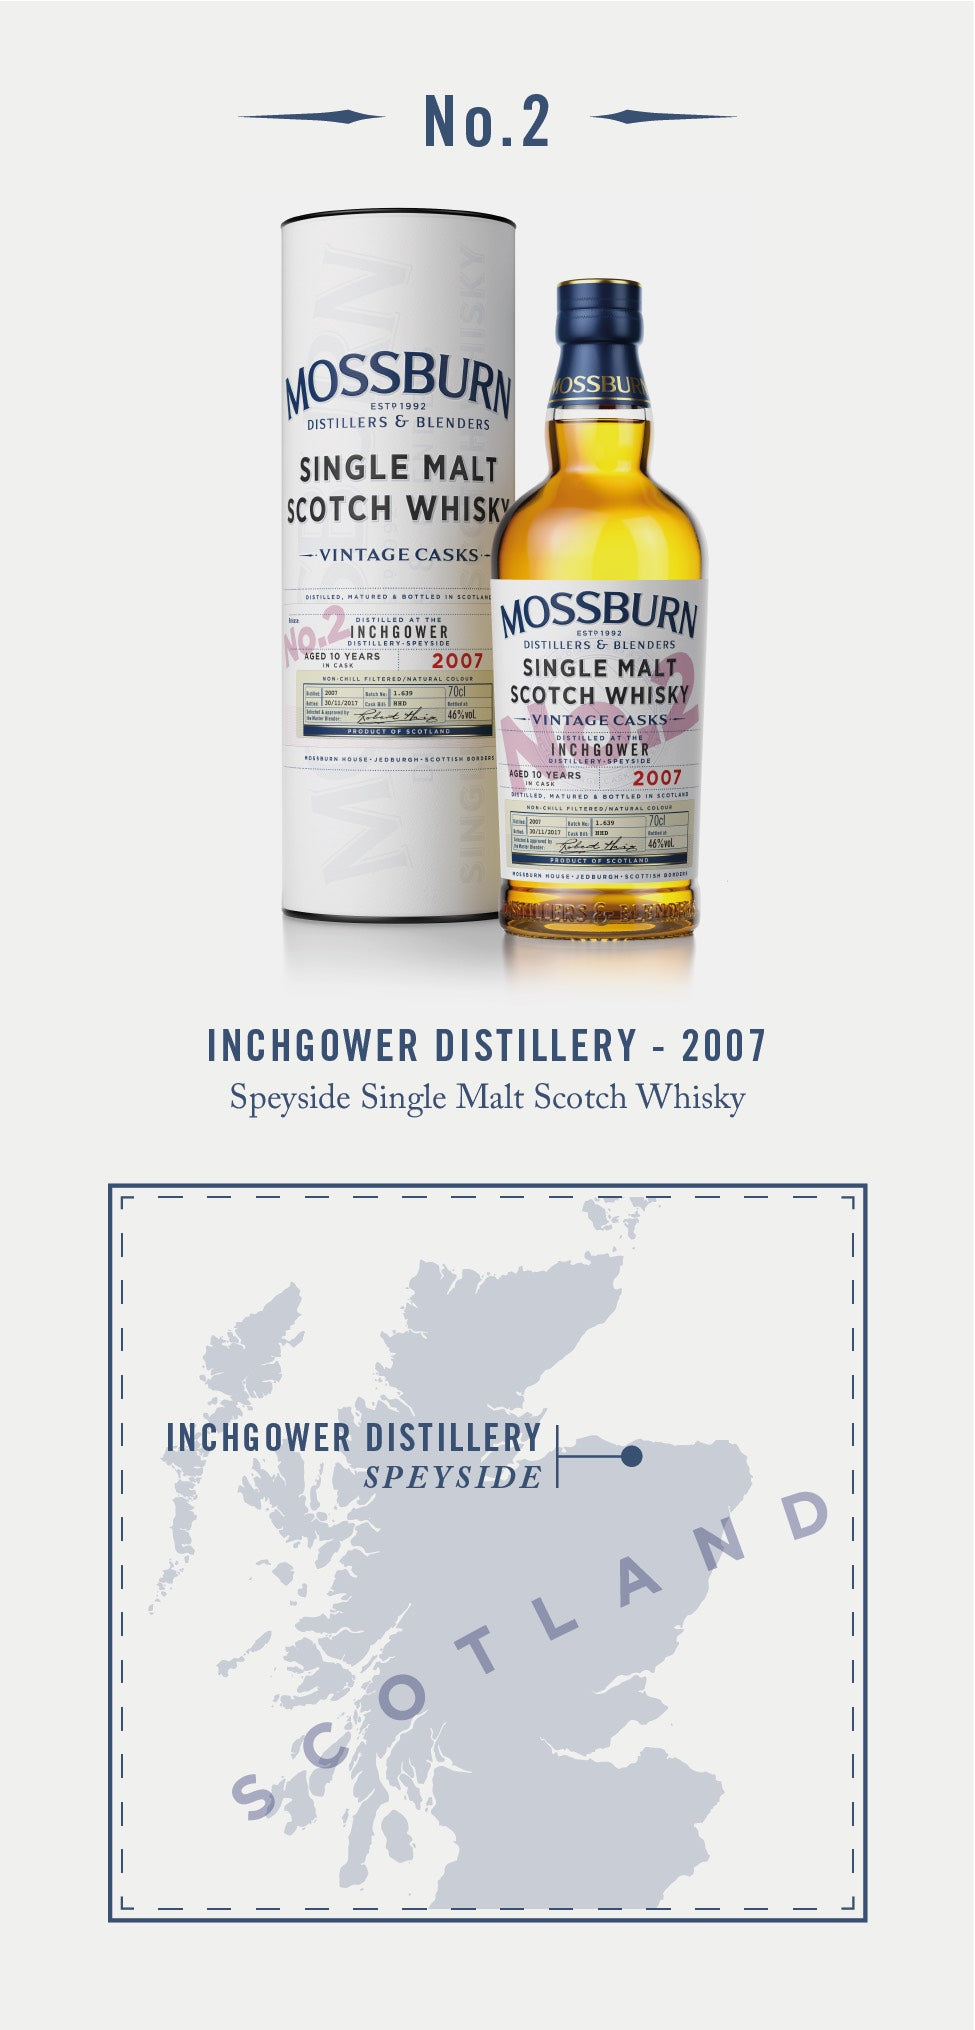 Inchgower 10 Years Old No. 2 Scotch Whisky by Mossburn Distillers